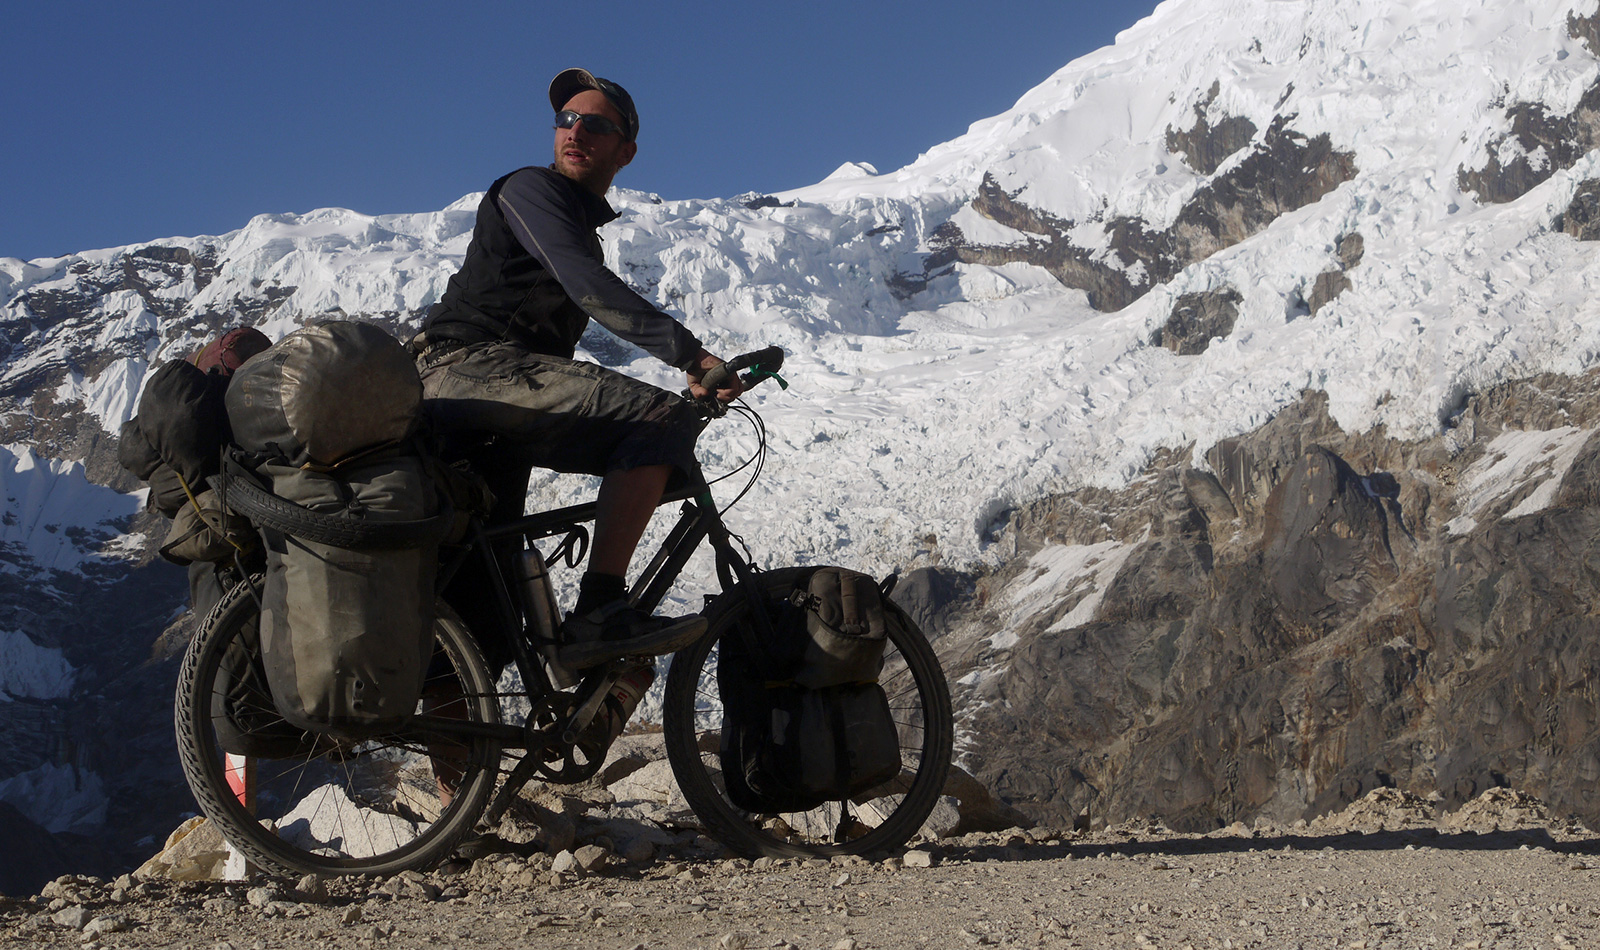 Snail's Pass - Across the Andes by Bike